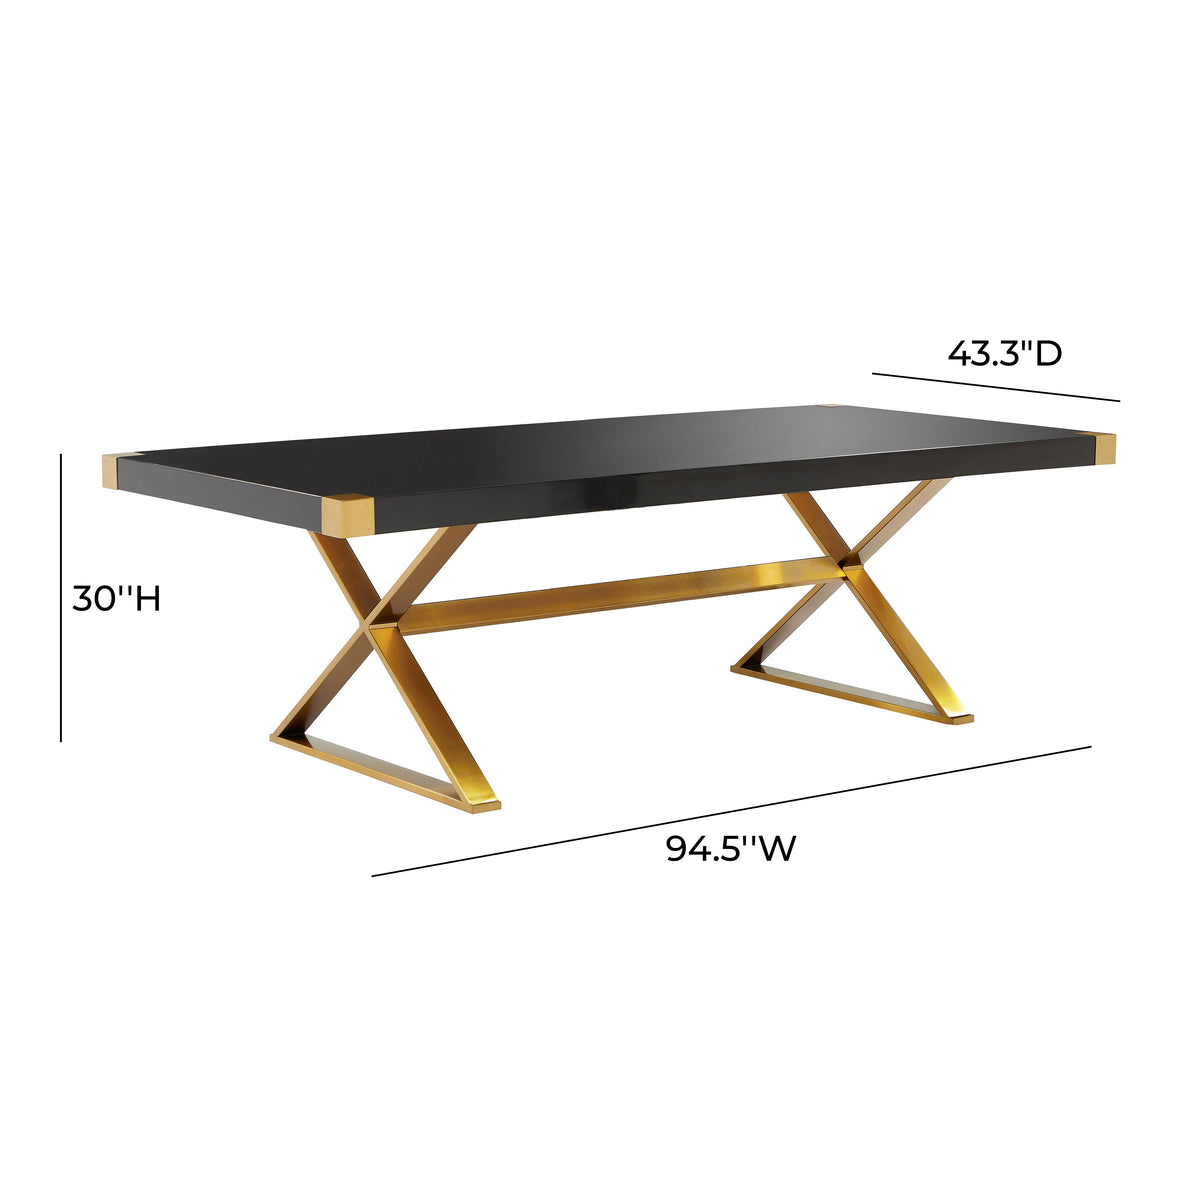 Adeline Black Lacquer Dining Table - Be Bold Furniture